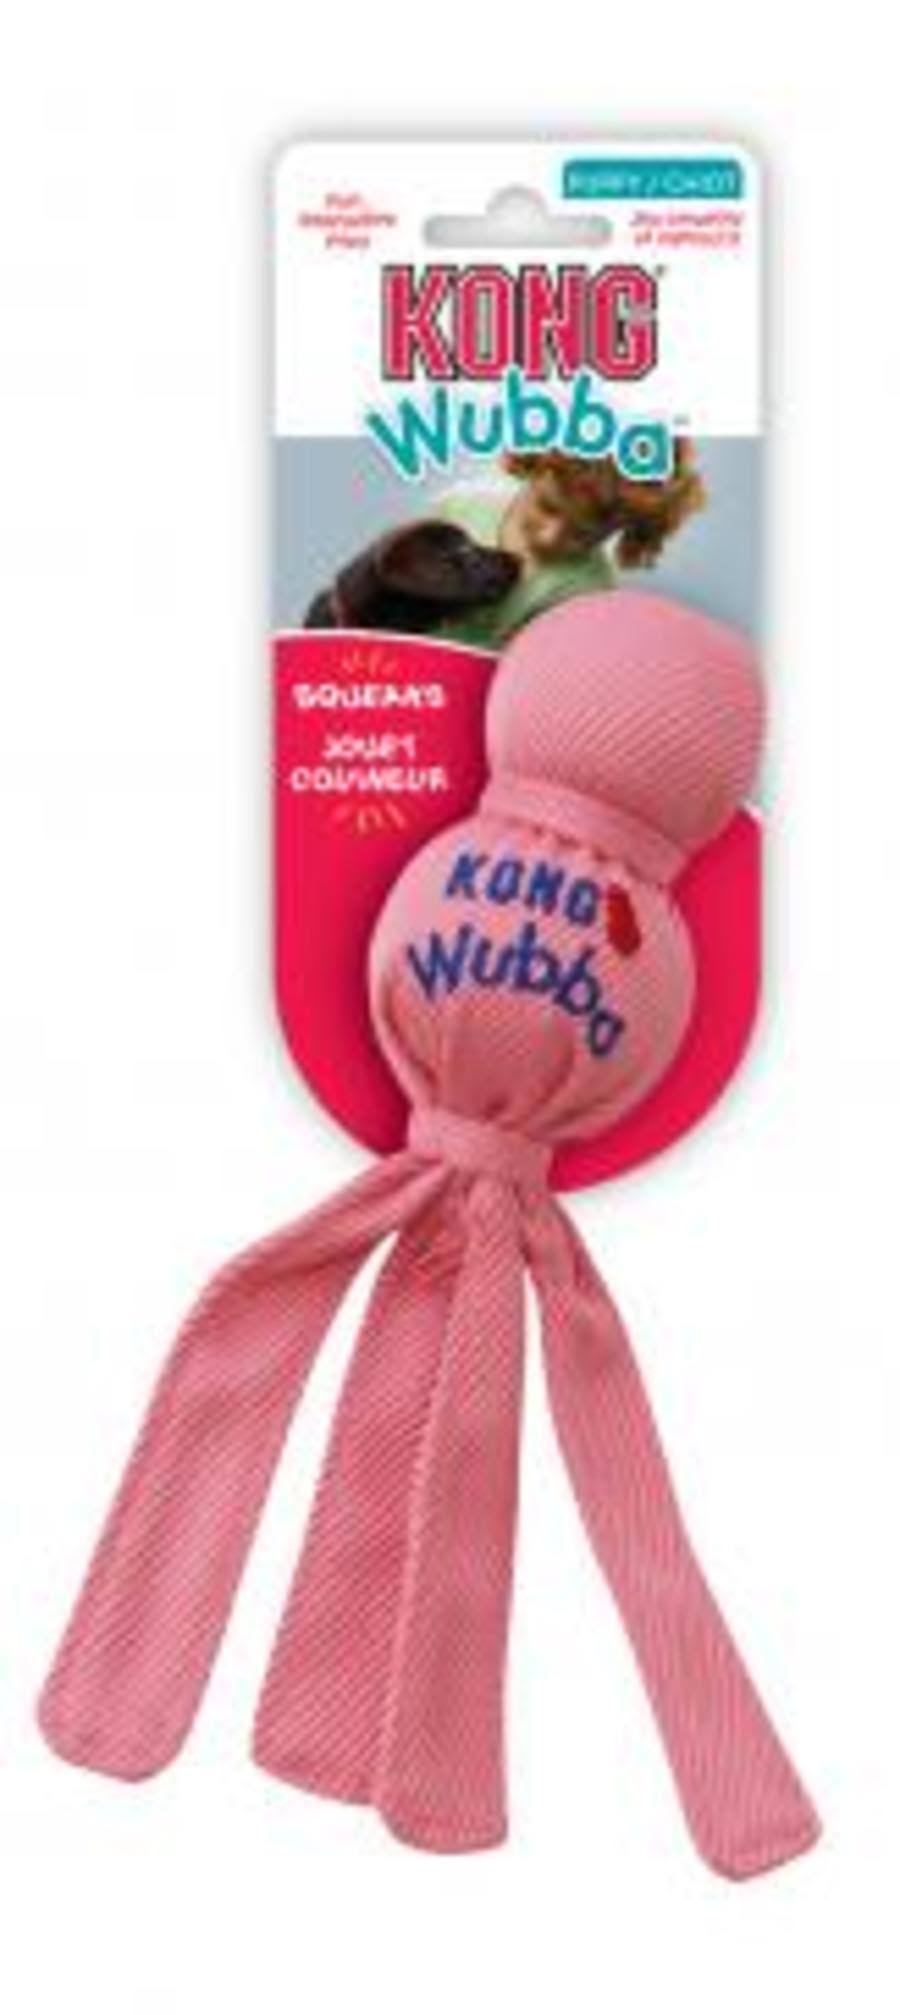 Kong Wubba Puppy Dog Toy - Assorted Colors